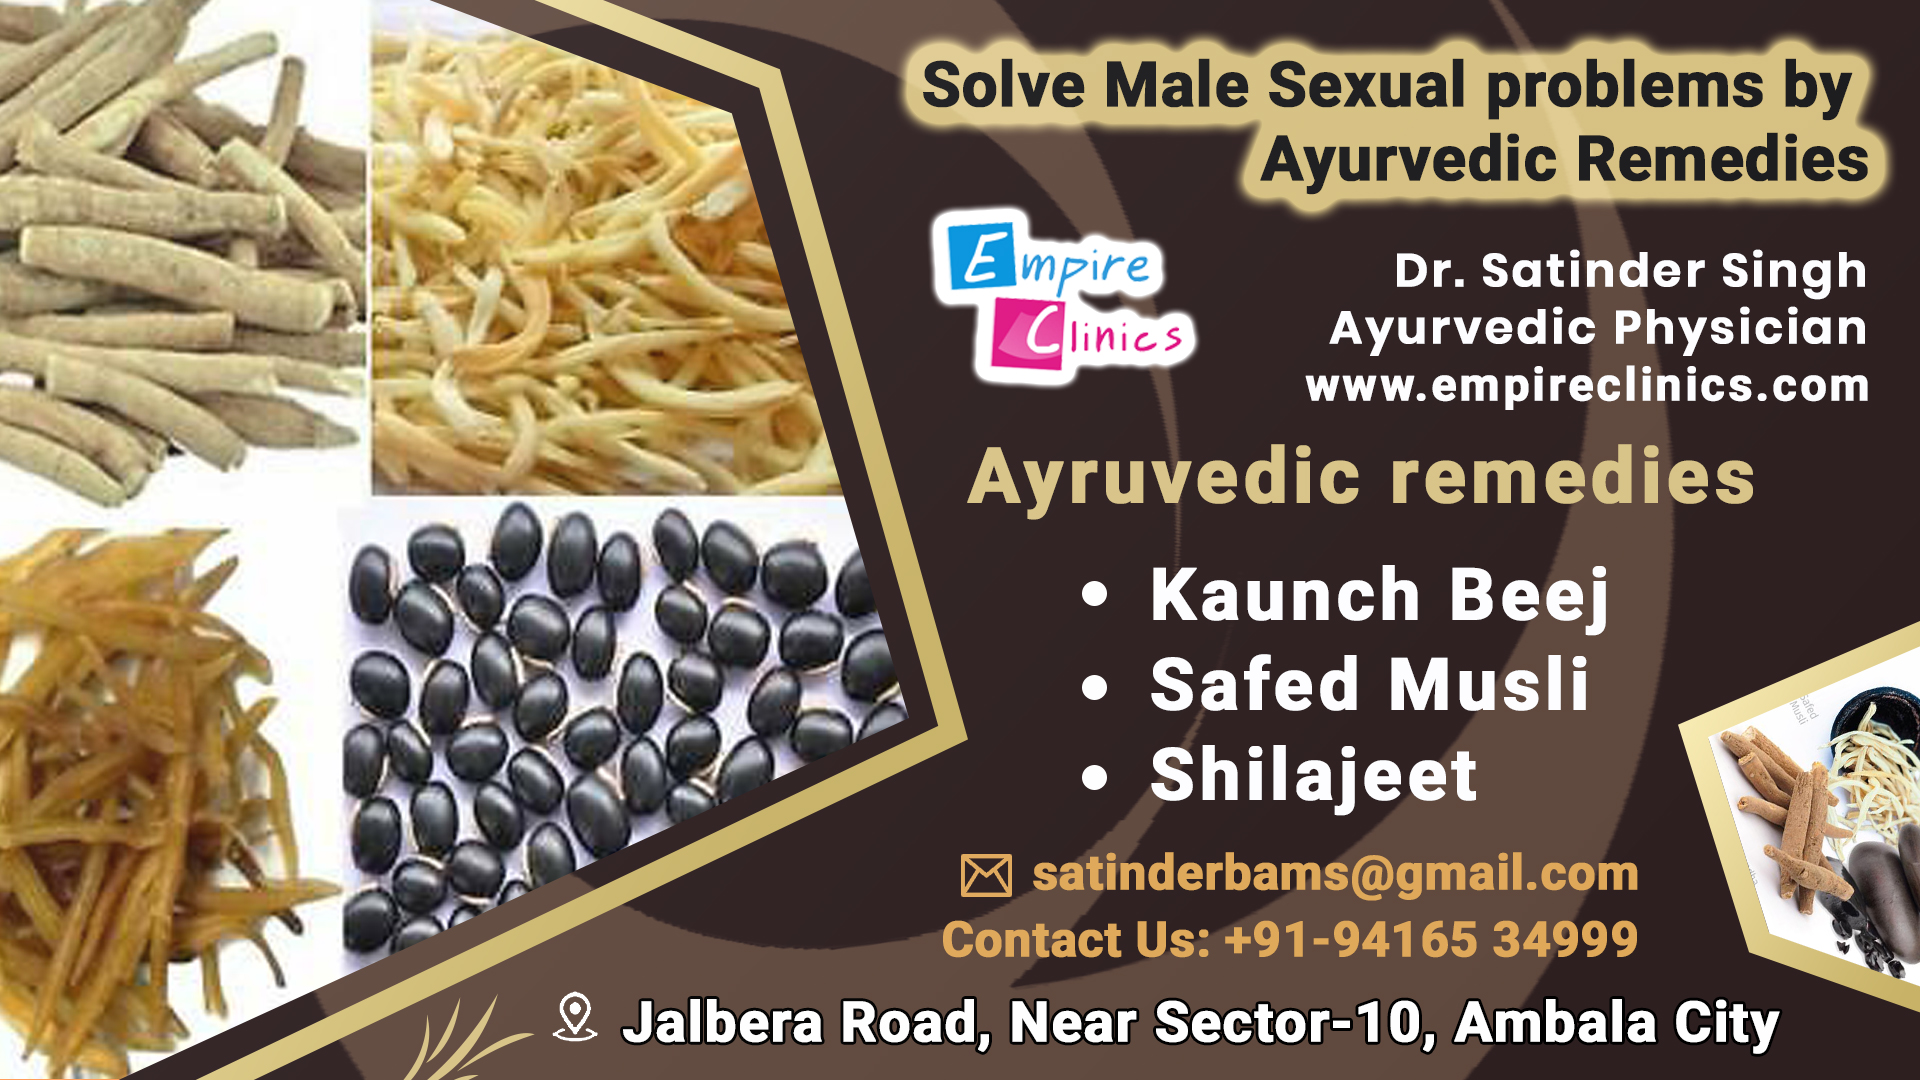 Solve Male Sexual problems by Ayurvedic Remedies